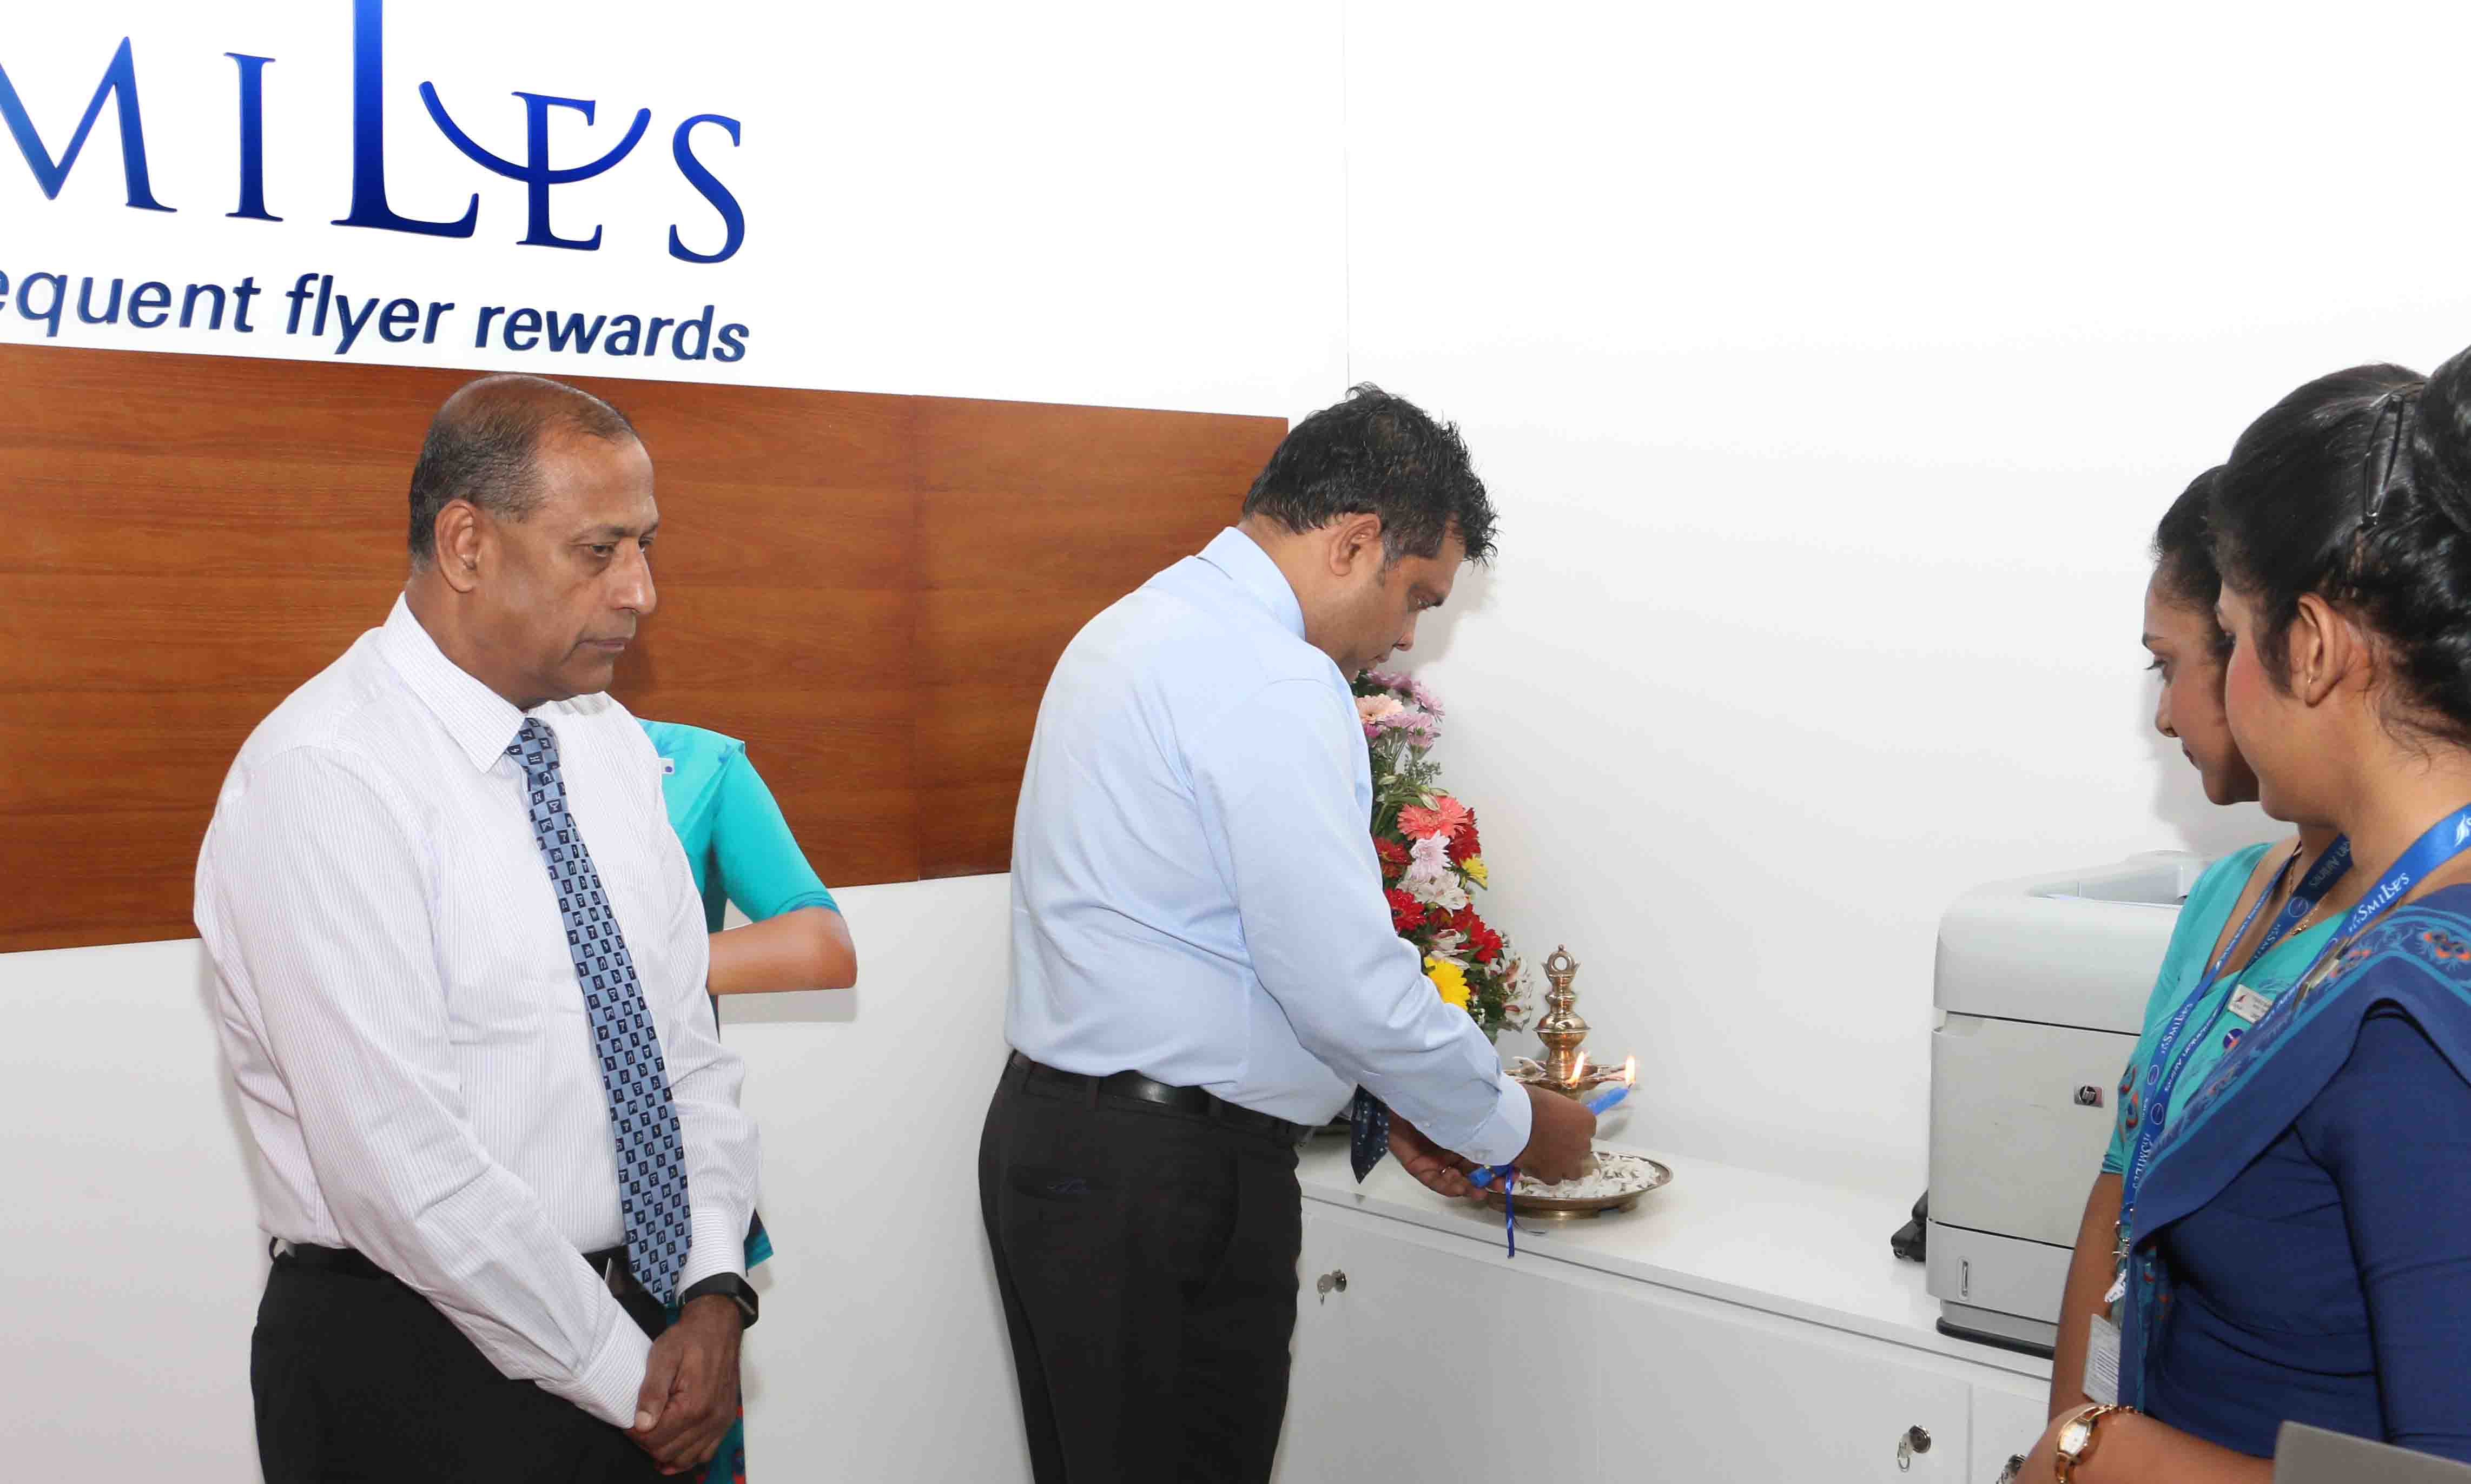 SriLankan Airlines Head of Worldwide Sales & Distribution Dimuthu Tennakoon lighting the oil lamp at the opening ceremony, whilst SriLankan Airlines Chief Commercial Officer Siva Ramachandran (left) looks on